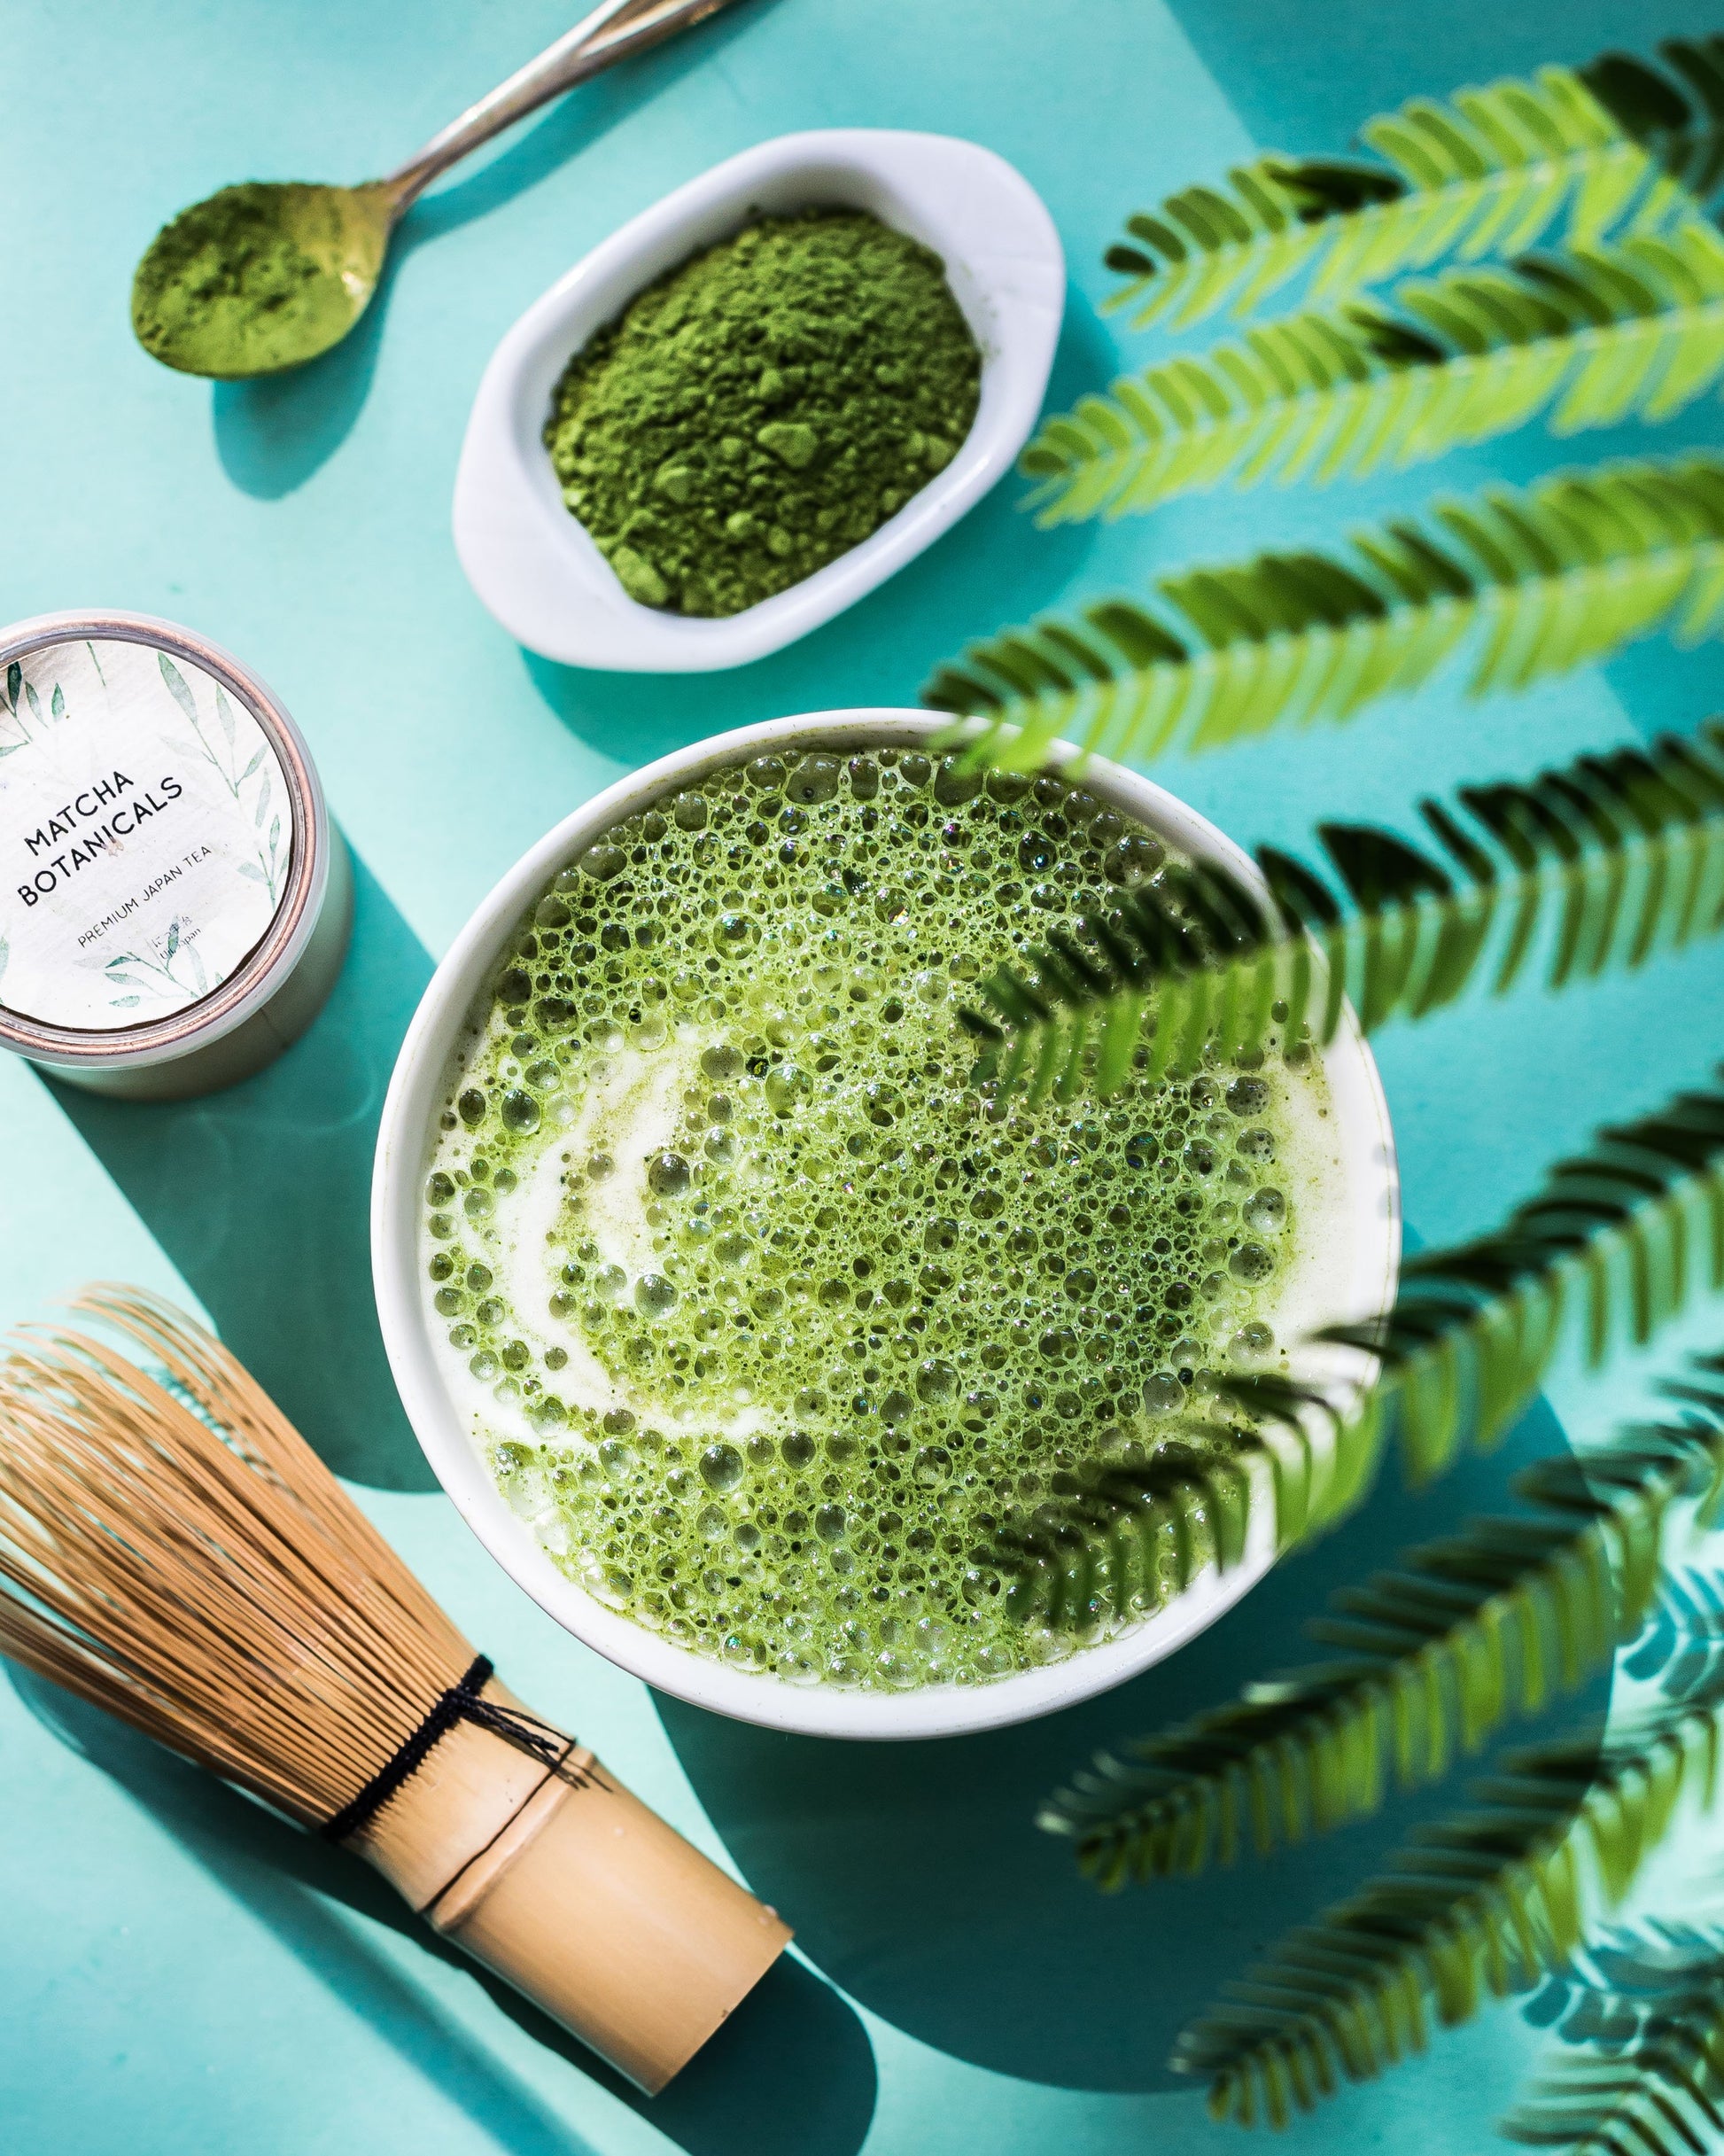 Fouet en bambou traditionnel - thé matcha – The Vegetal Lab Experience